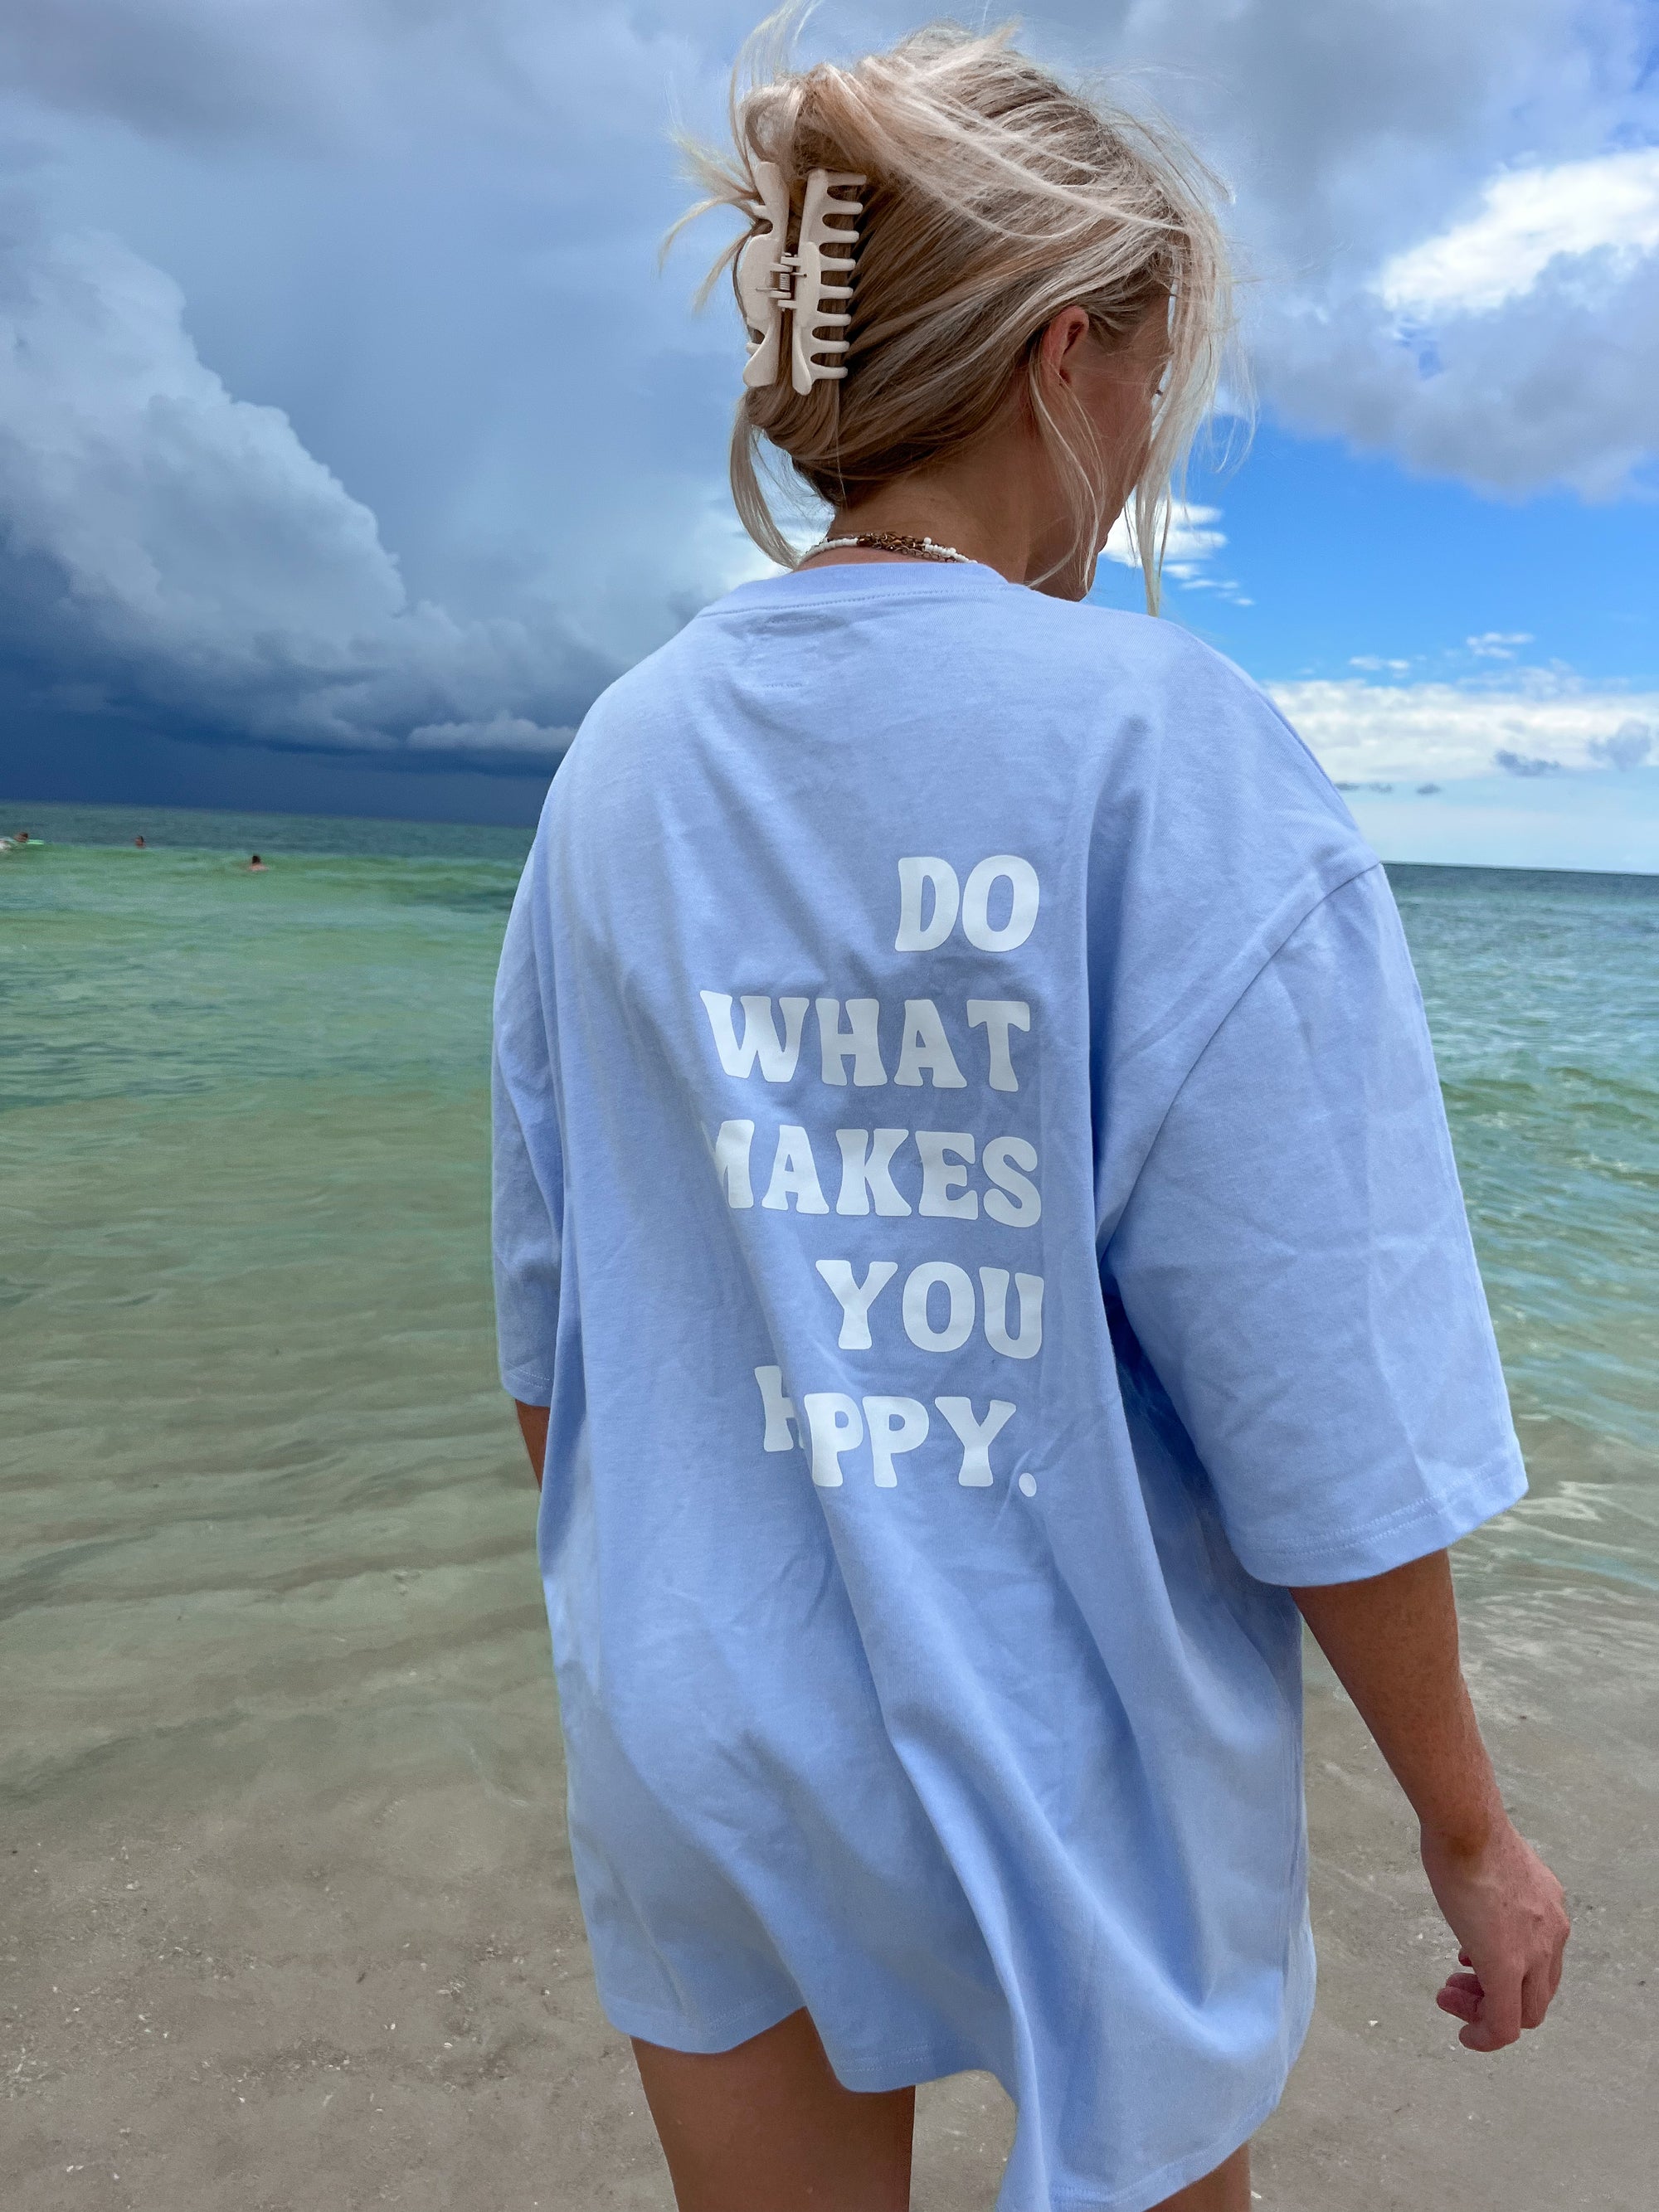 Do What Makes You Happy Tee - Sunkissedcoconut